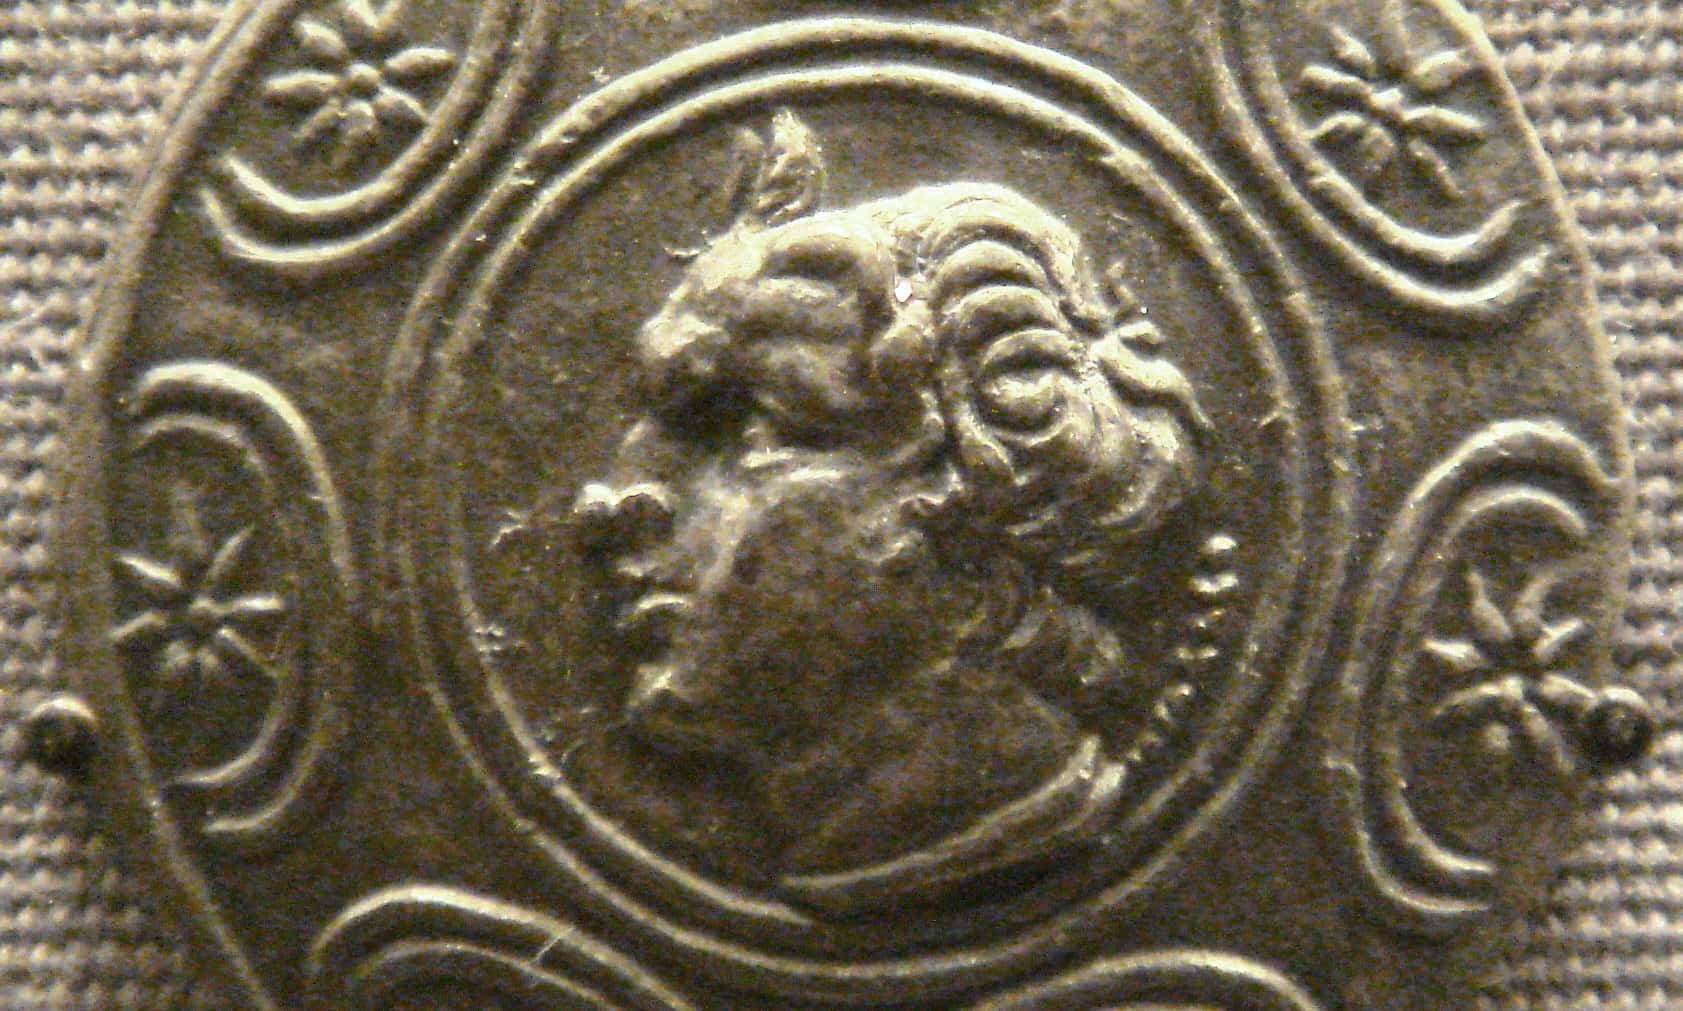 Ptolemy I Soter (British Museum)  Ptolemy i soter, Alexander the